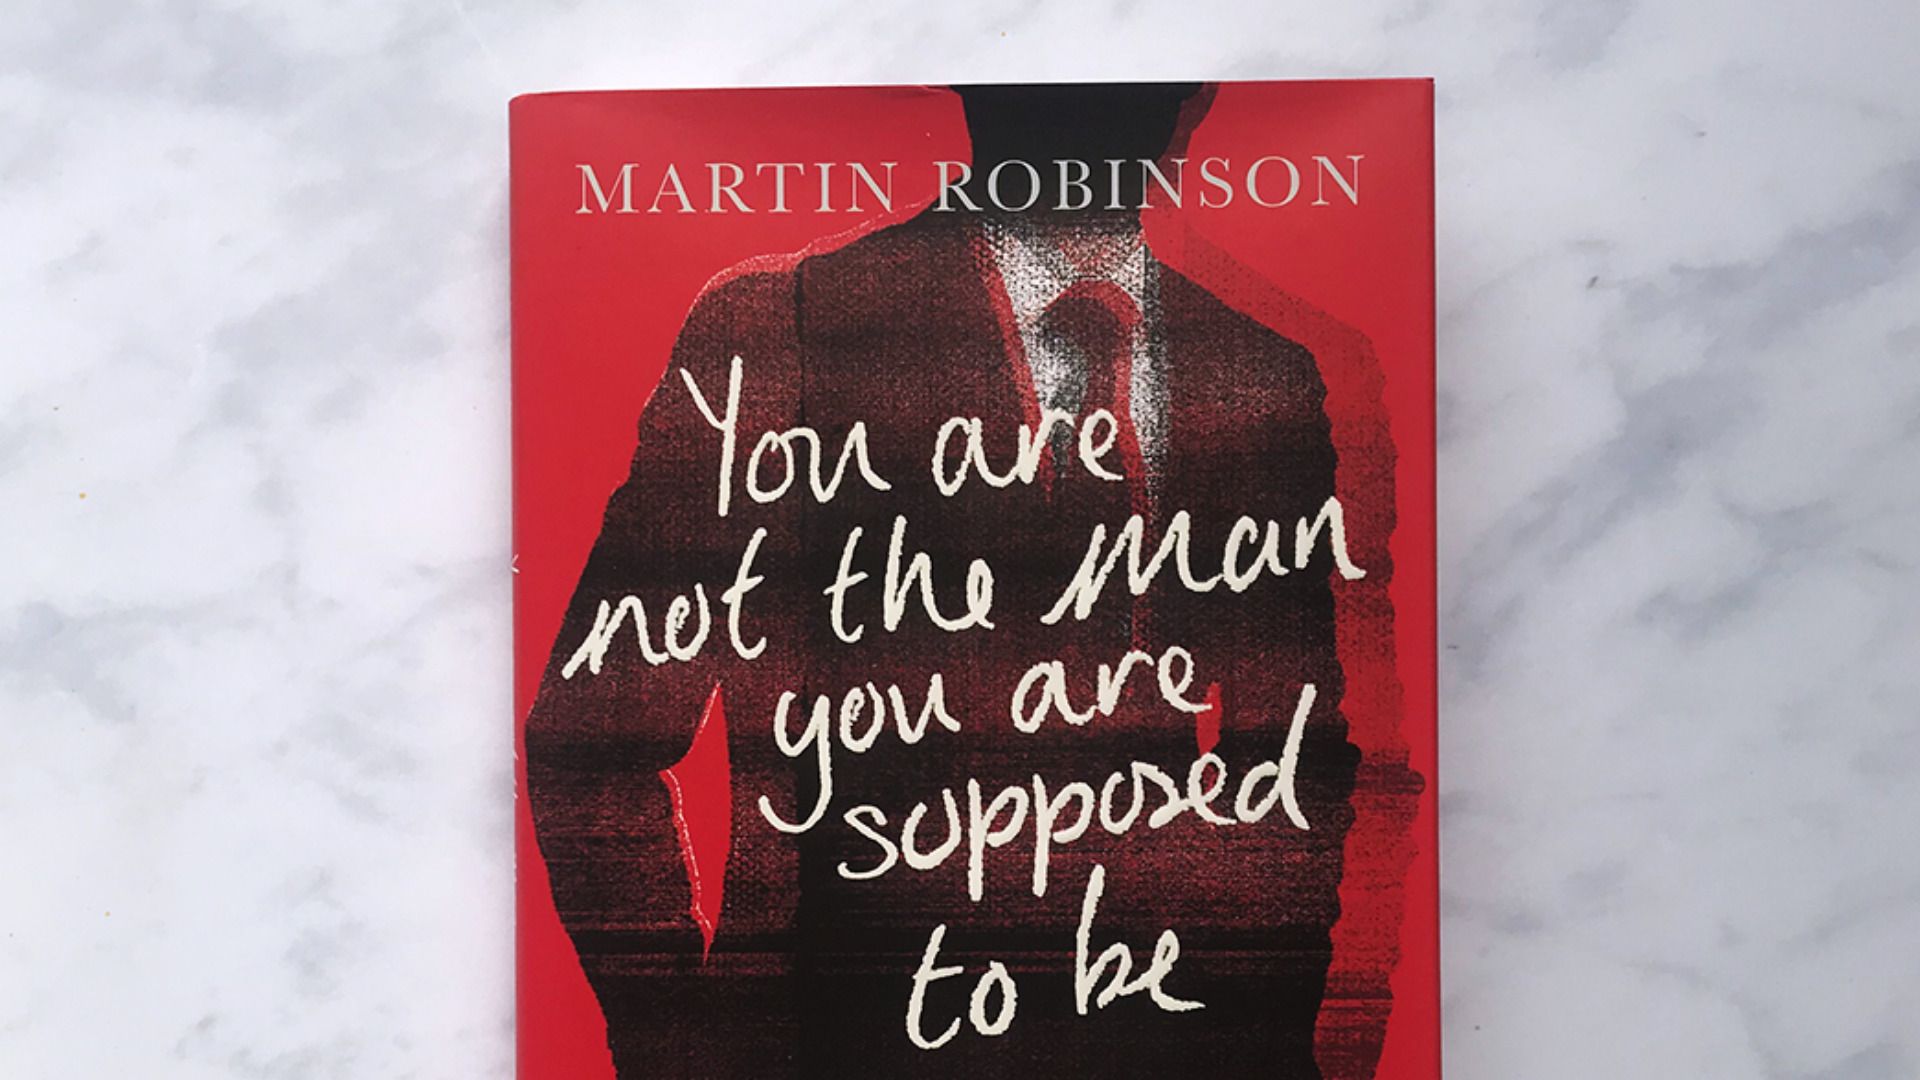 You are not the man you are supposed to be